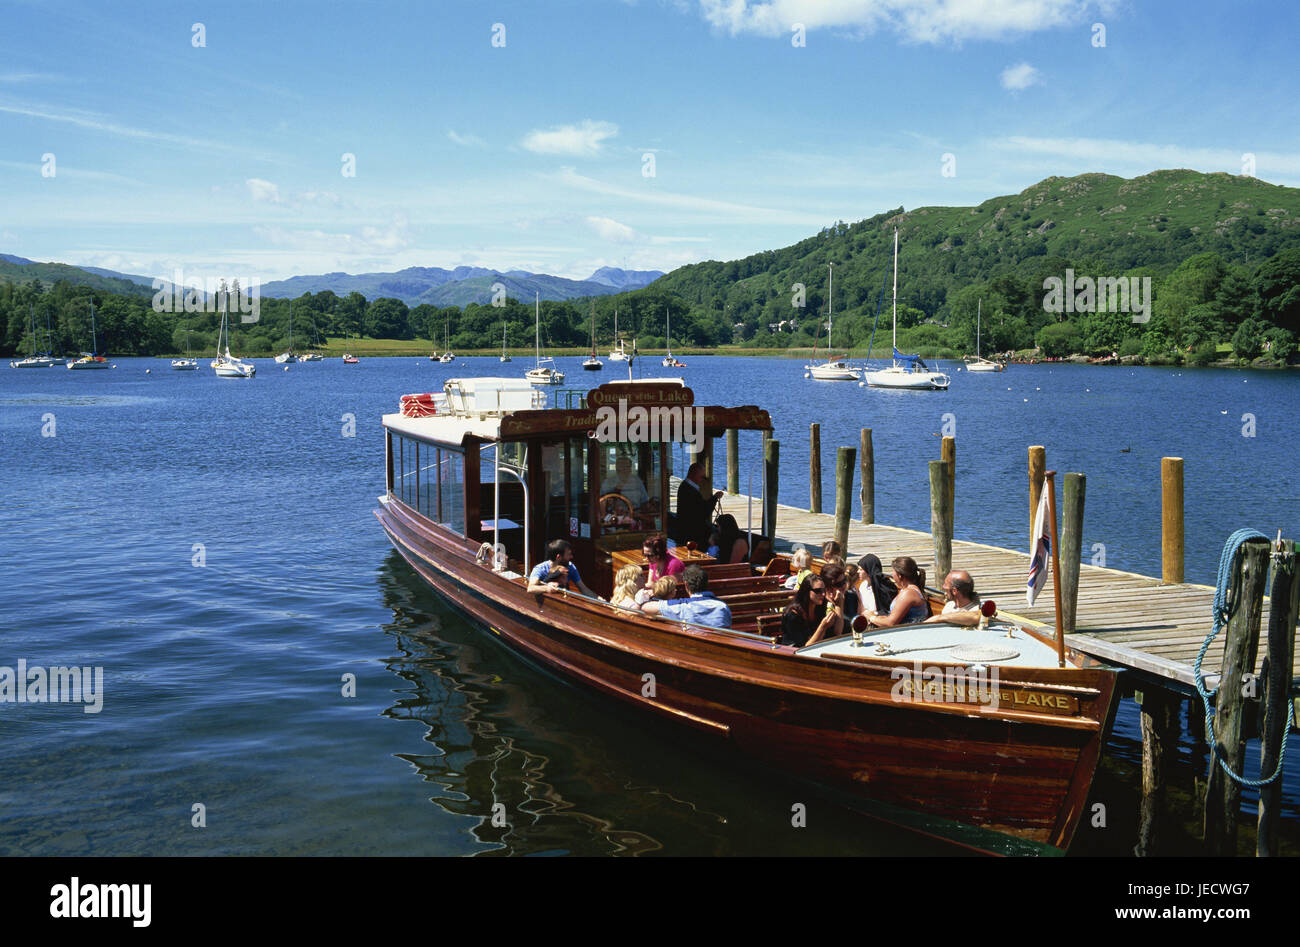 Great Britain, England, Cumbria, brine District, brine Windermere, Ambleside, excursion boat, tourist, no model release, Europe, water, lake, landing stage, Stag, wooden post, tourist boot, tourism, boot tour, excursion, wooden boot, navigation, sunny, people, Stock Photo